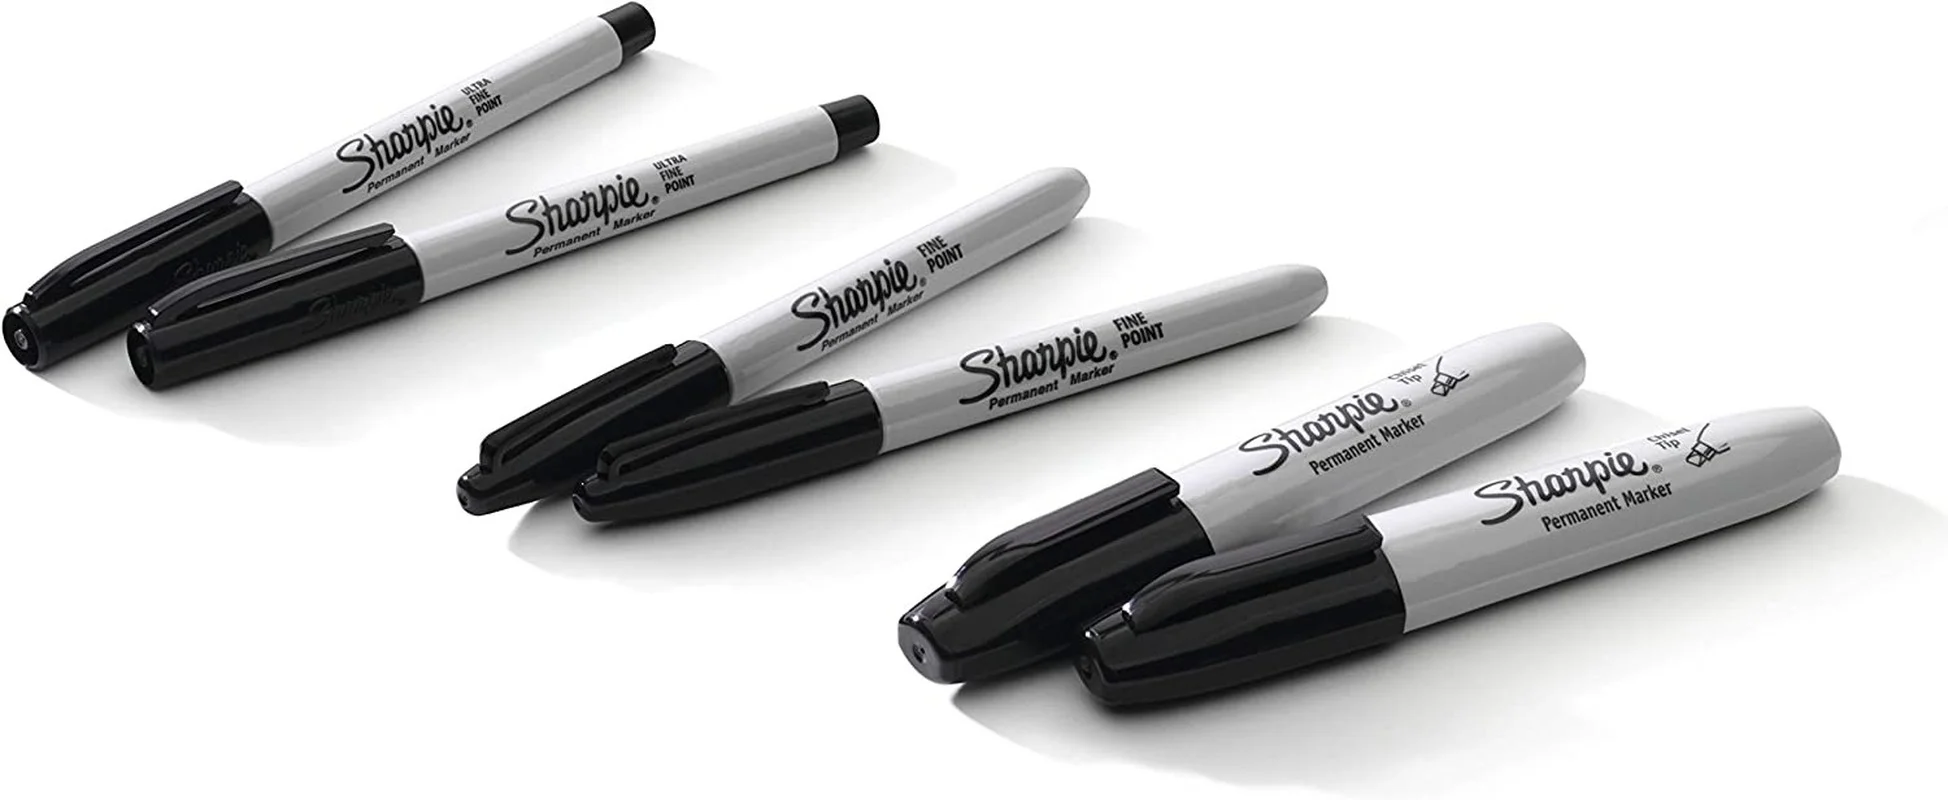 Sharpie® Ultra Fine Point Permanent Markers, Black